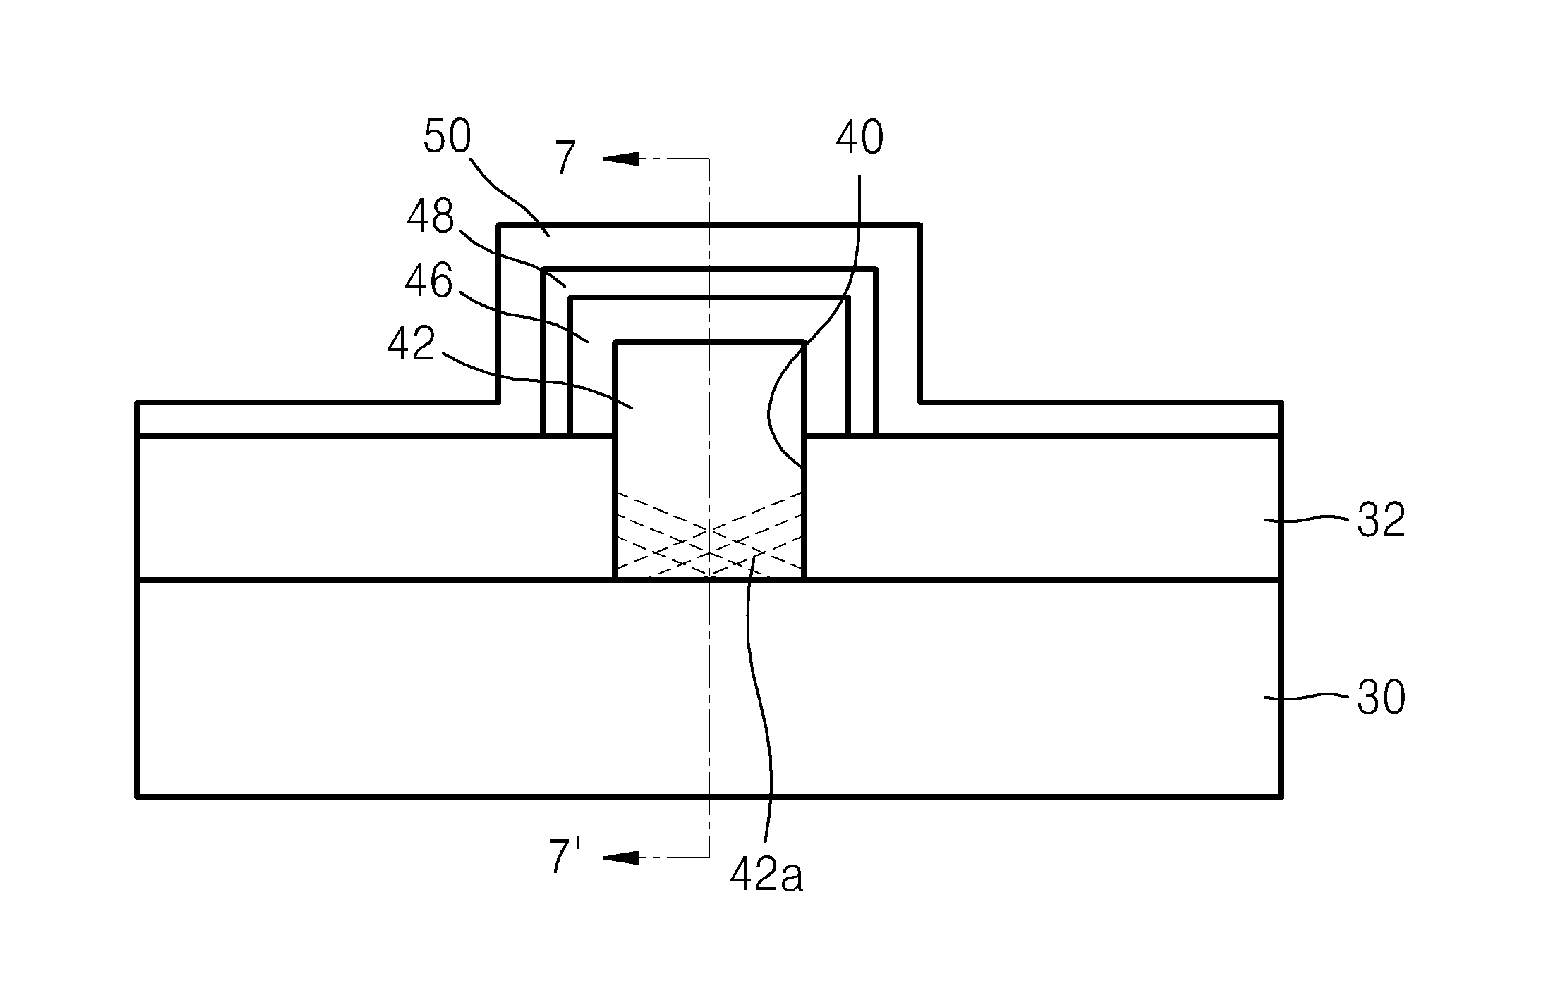 Semiconductor device including a gate electrode on a protruding group III-V material layer and method of manufacturing the semiconductor device